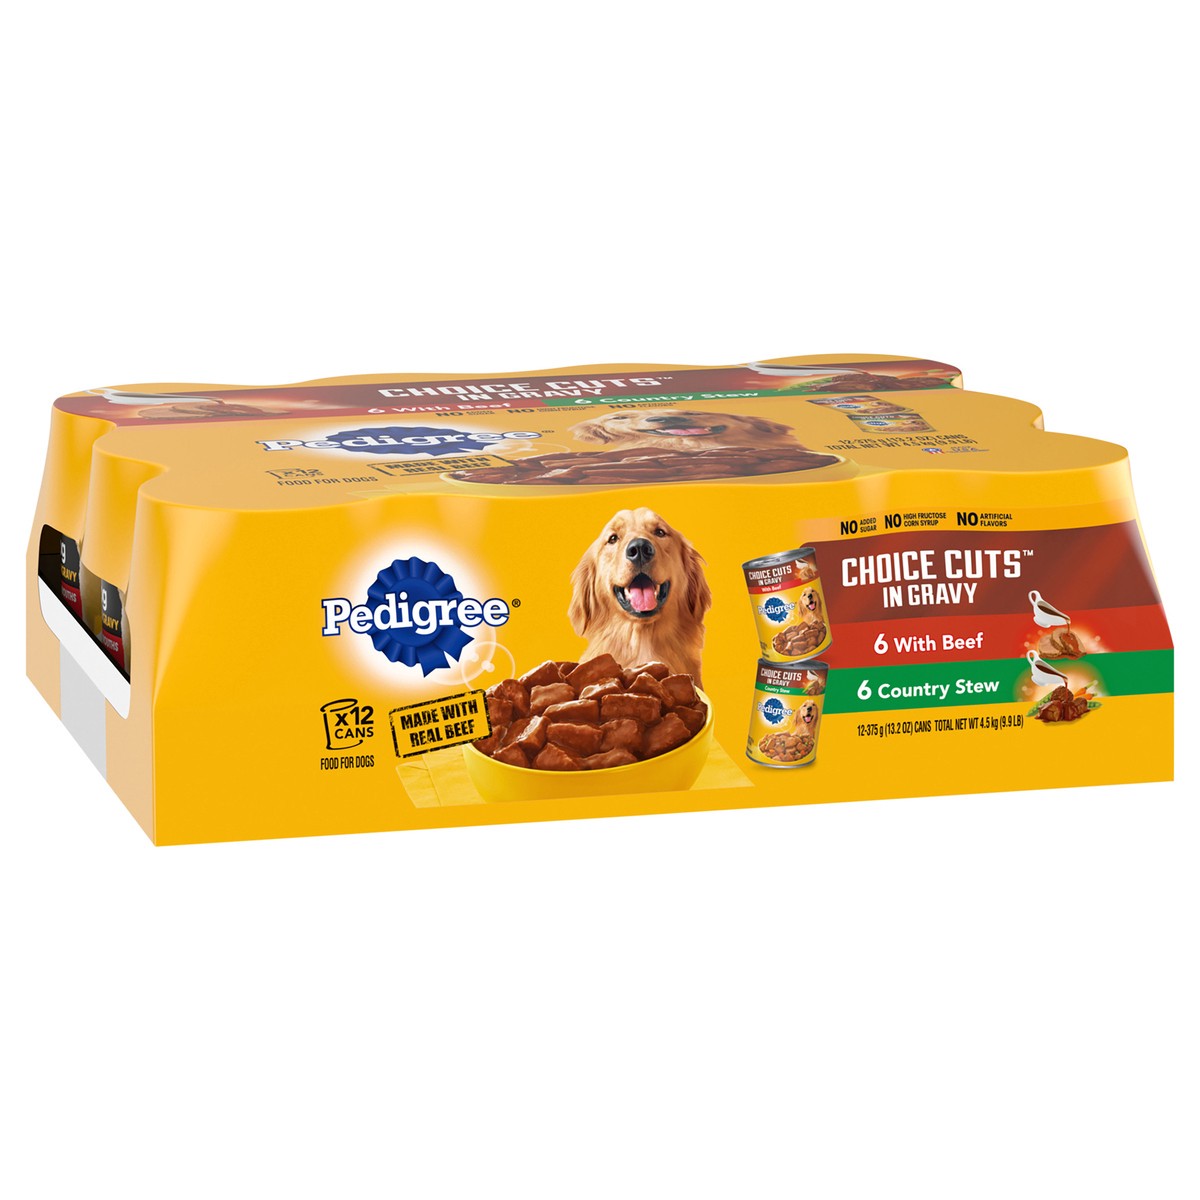 slide 2 of 9, Pedigree Choice Cuts in Gravy Combo Pack Beef & Country Stew Wet Dog Food, 13.2 oz, 12 ct